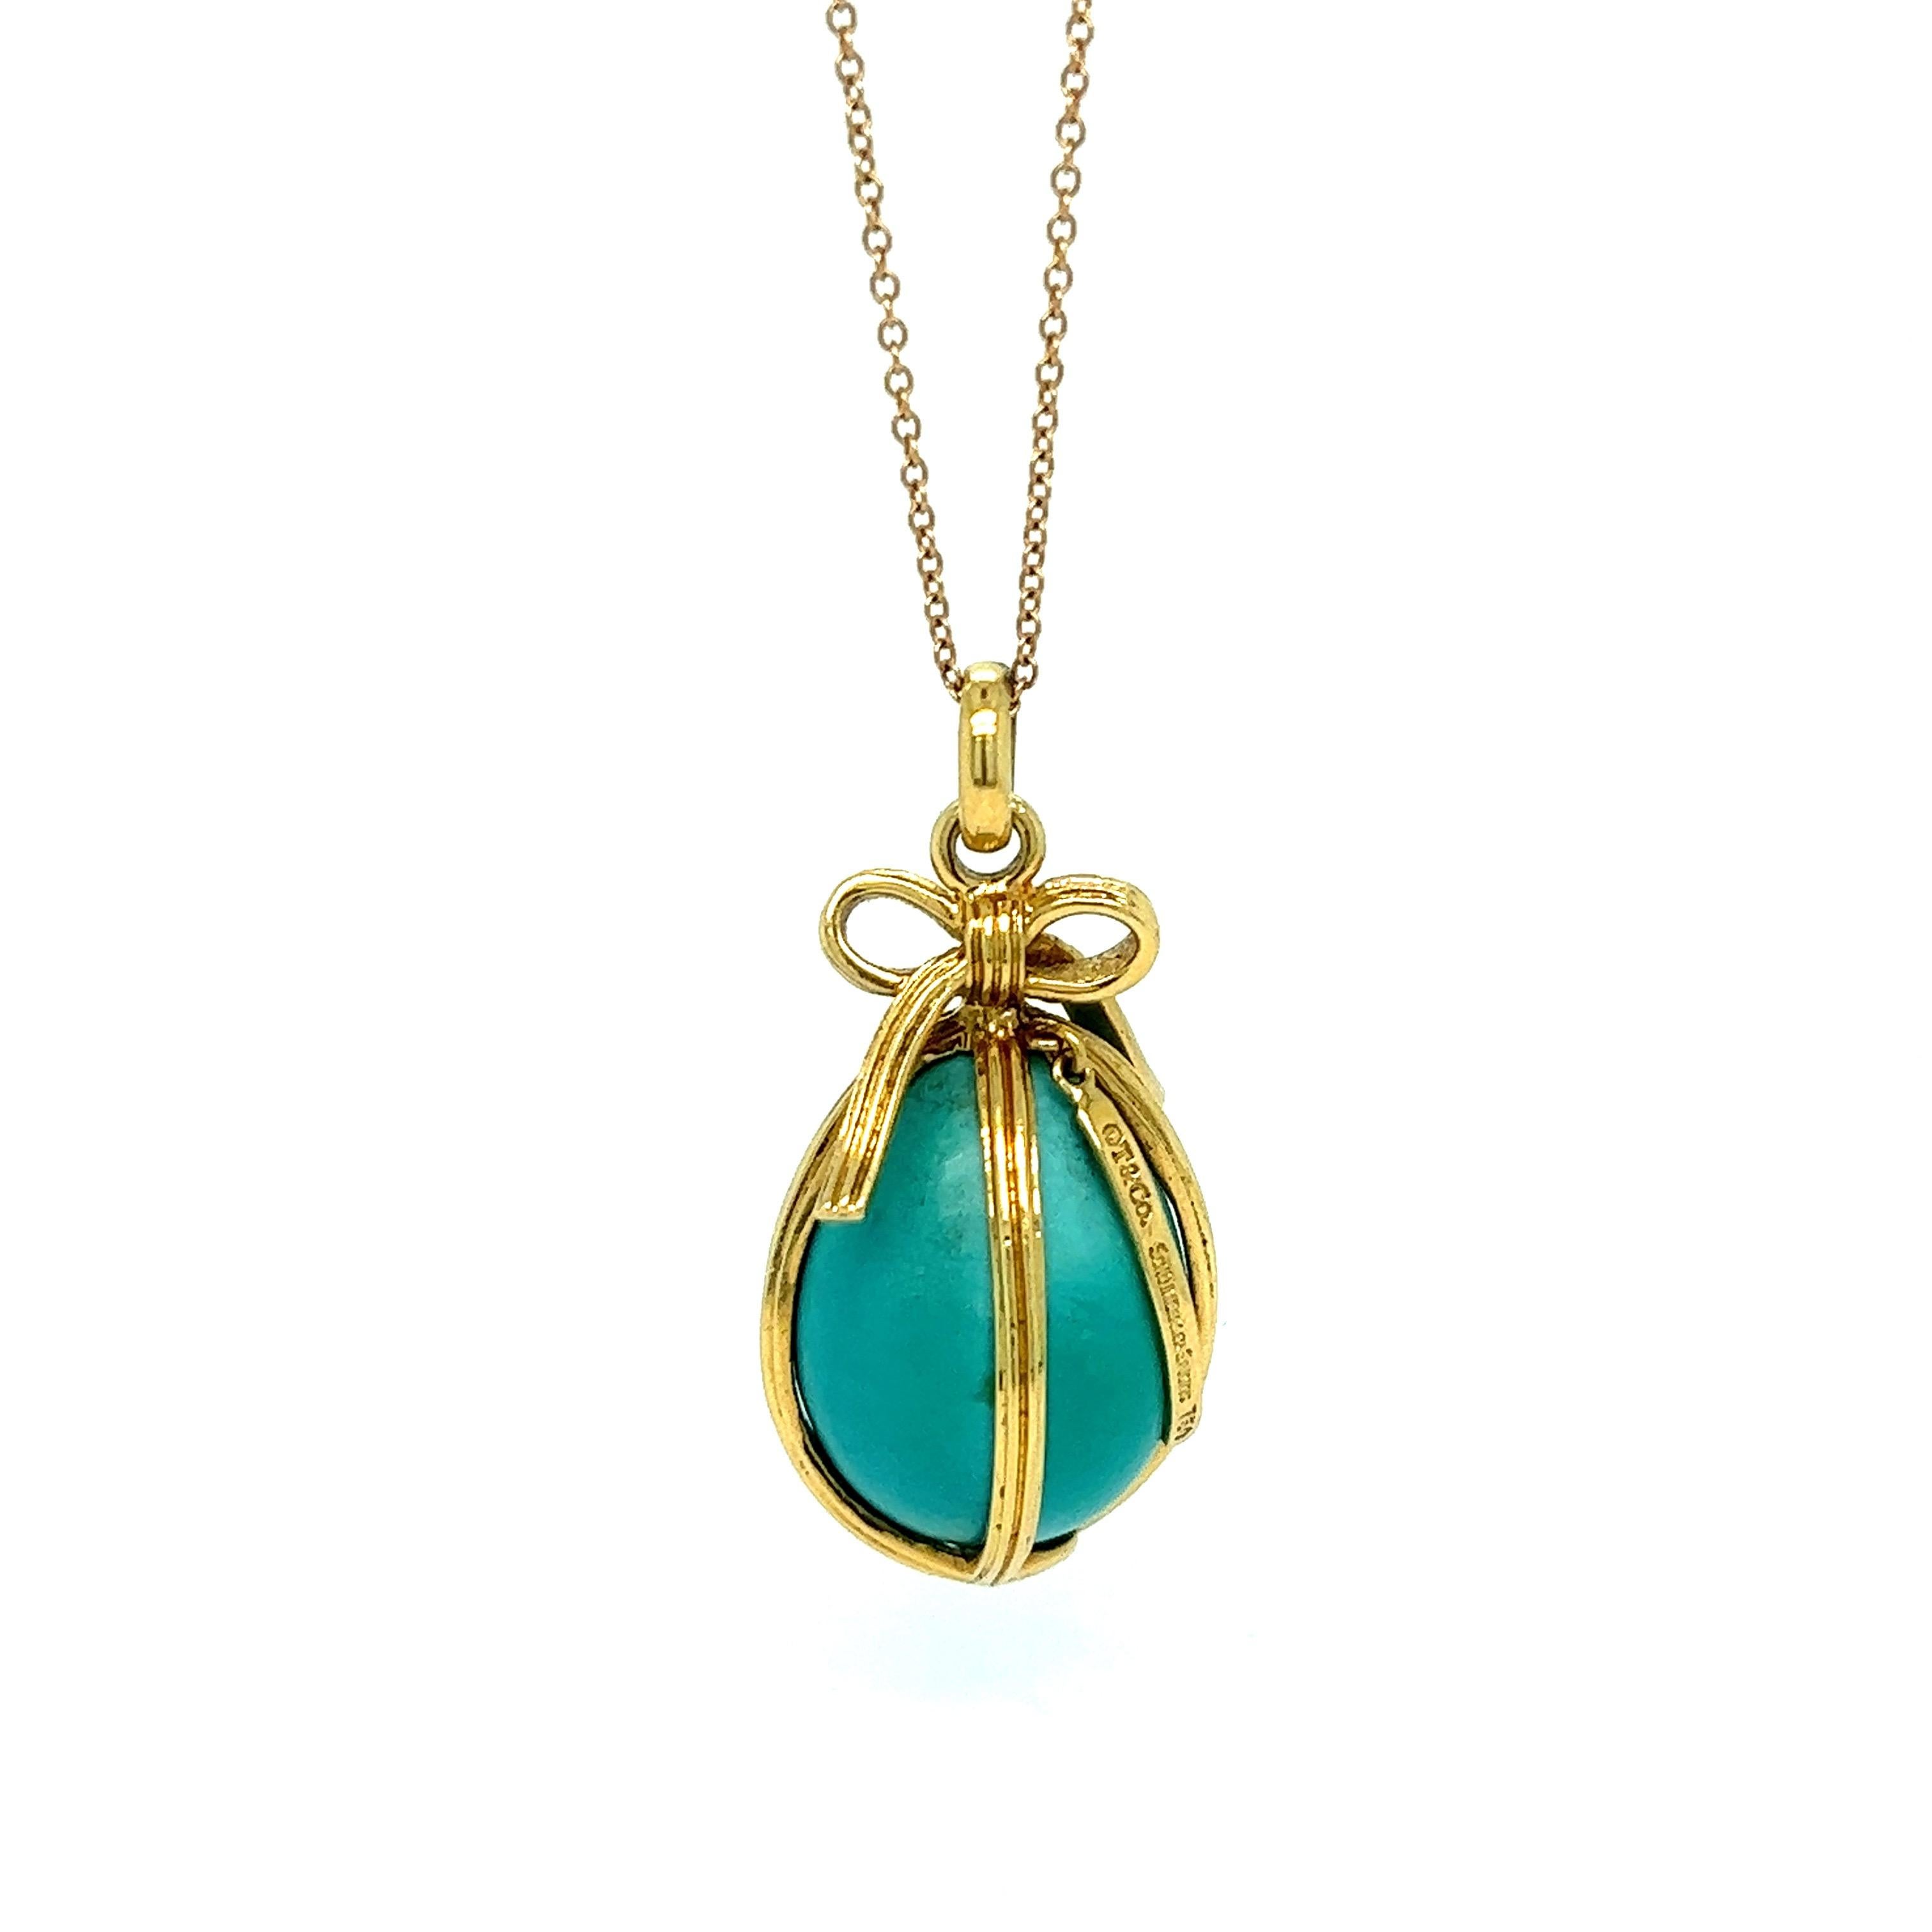 Schlumberger for Tiffany & Co. turquoise egg pendant necklace 

A turquoise egg wrapped as a gift, with ribbon motif, 18 karat yellow gold; marked T&Co., Schlumberger Studios, 750

Size: pendant width 0.69 inch, length 1.25 inches; chain length